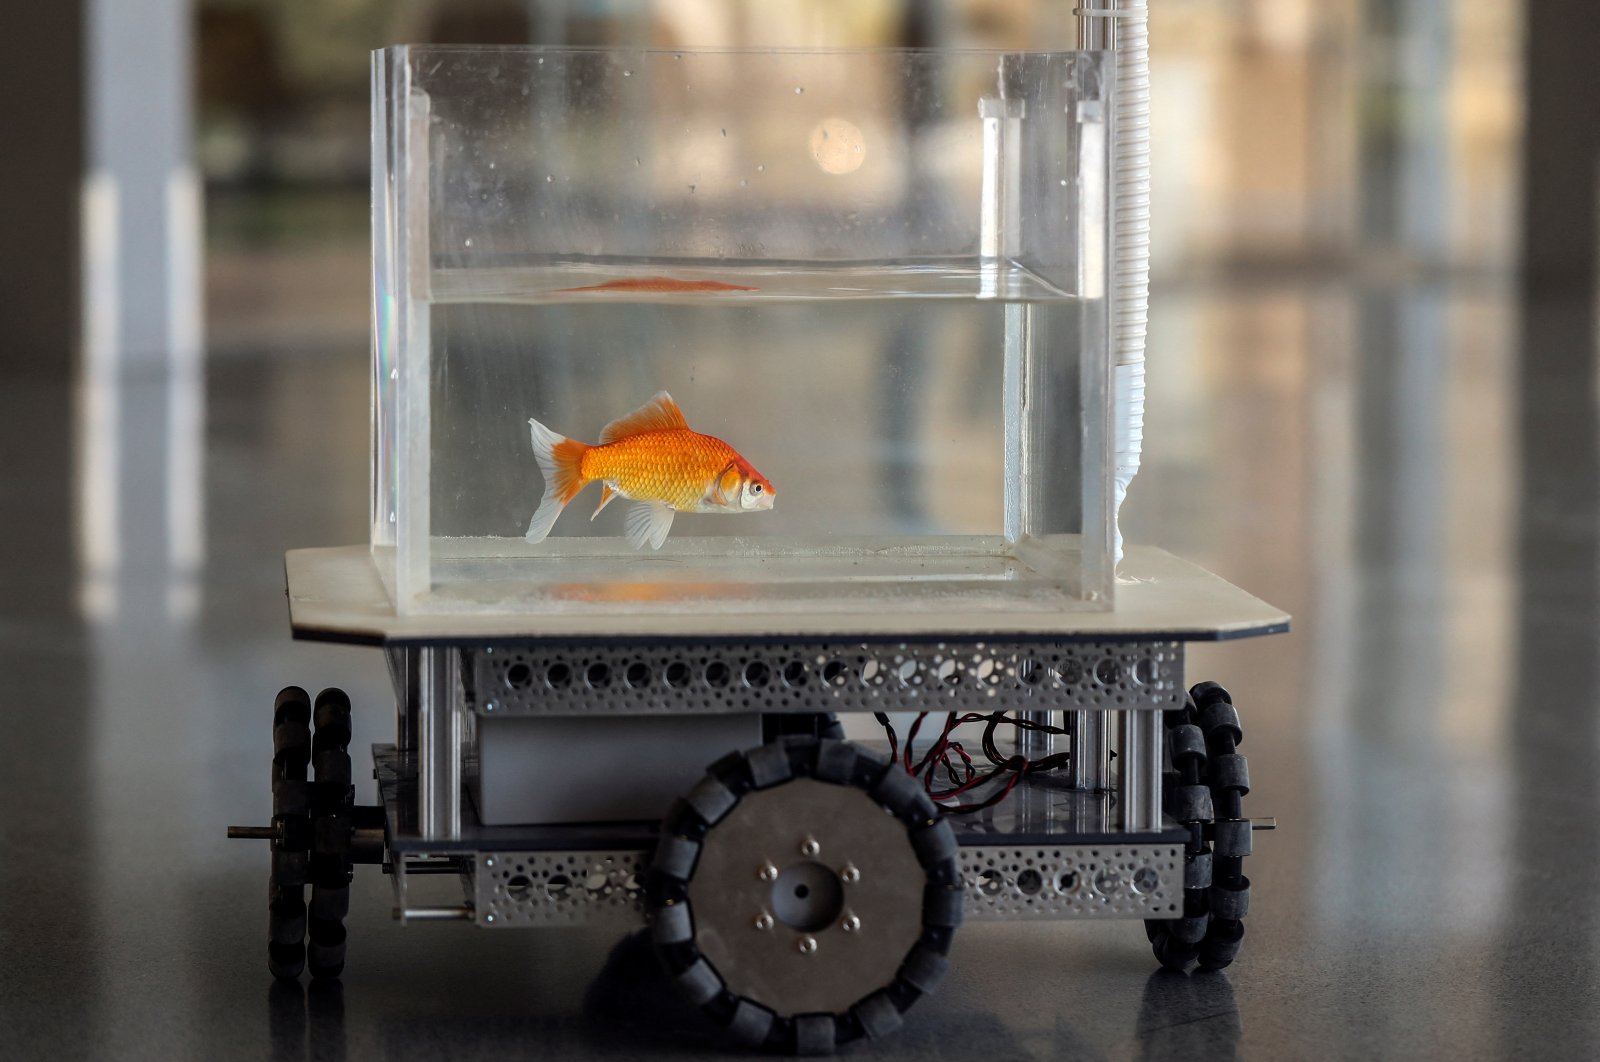 A goldfish navigates on land using a fish-operated vehicle developed by a research team at Ben-Gurion University in Beersheba, Israel, Jan. 6, 2022. (Reuters Photo)